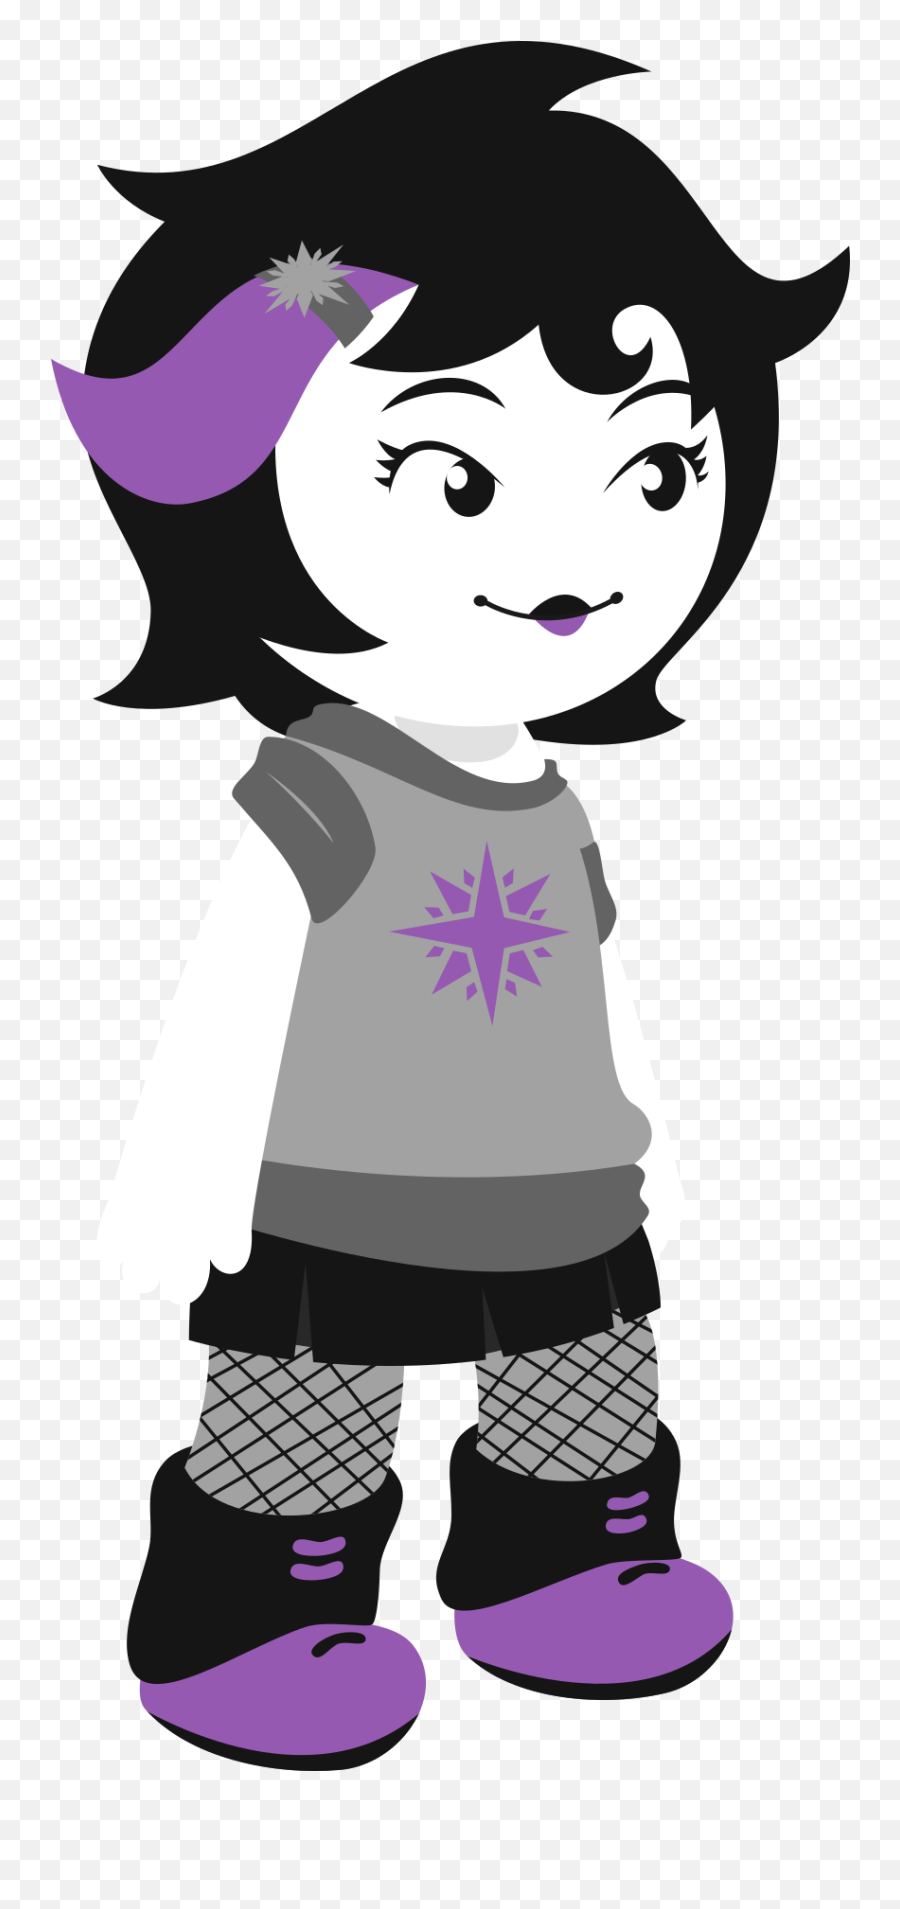 Lashes Out At Her Mum By Pretending To Be Out All Night Emoji,Hiveswap Logo